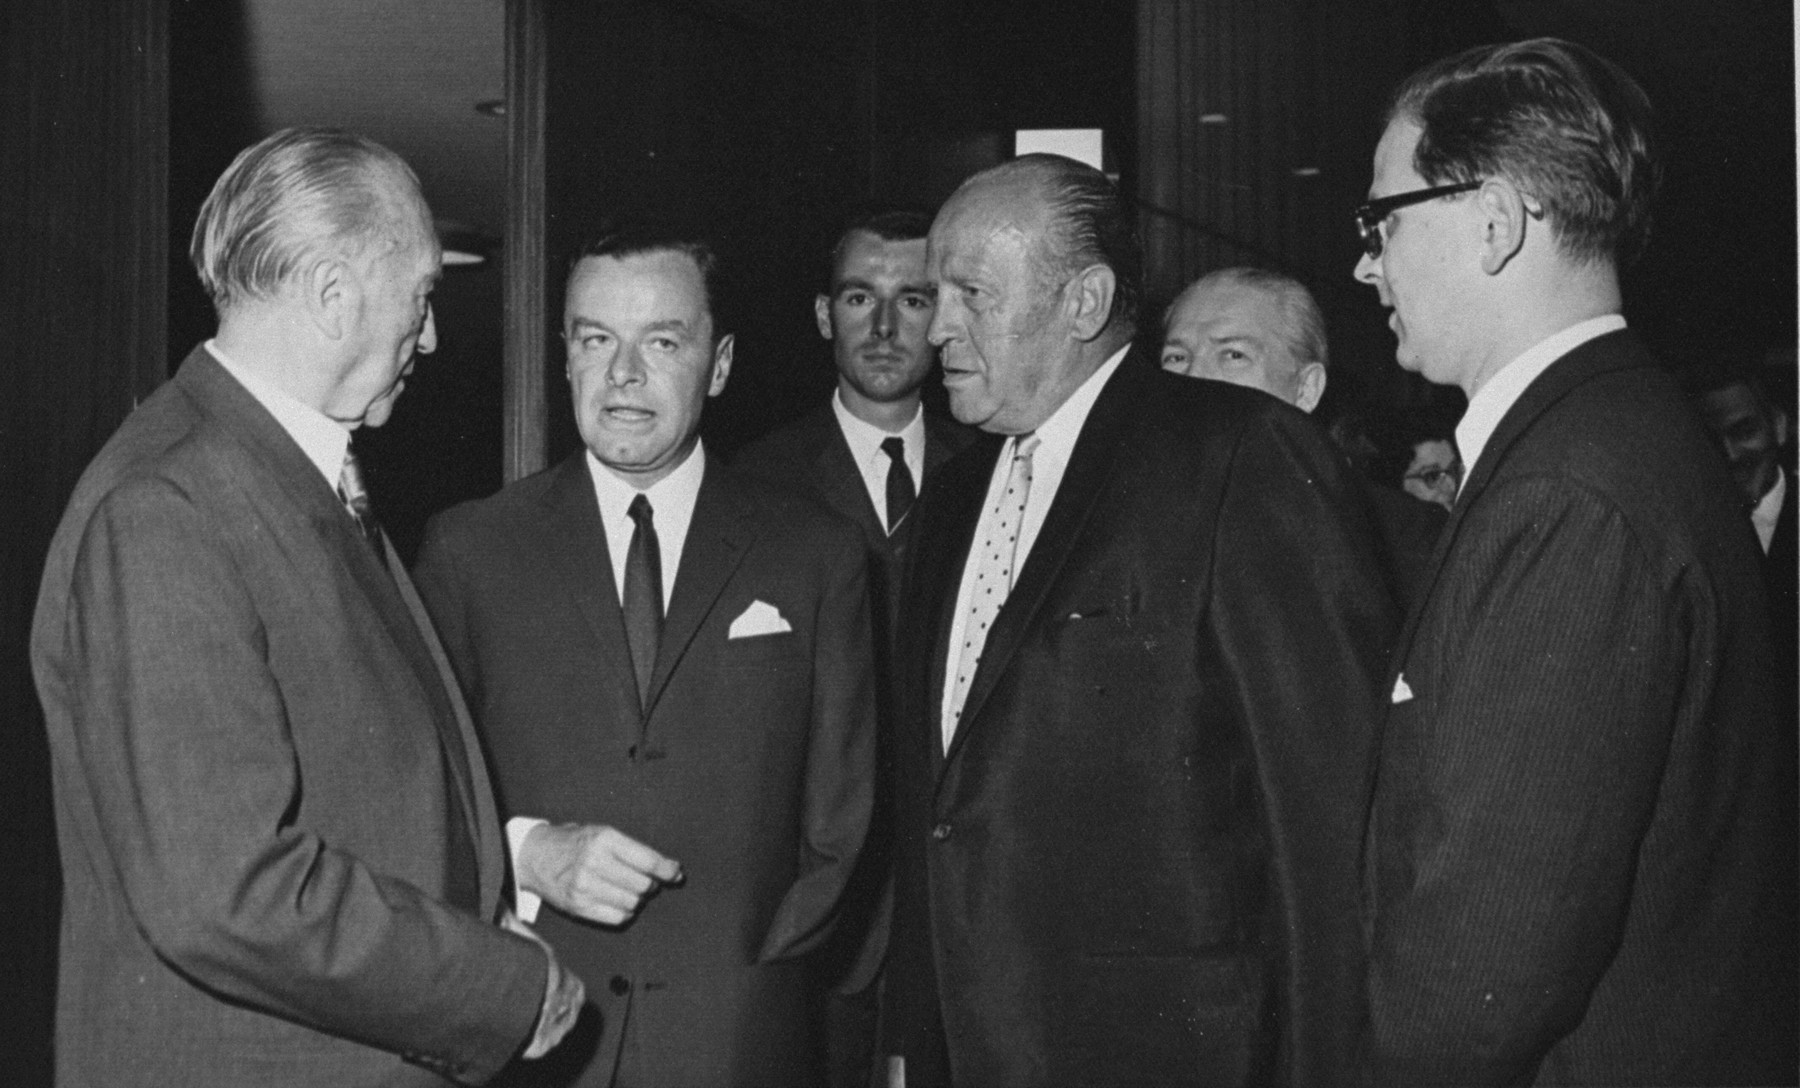 Oskar Schindler (center) with Konrad Adenauer, Chancellor of Germany.

The man in the middle is Germany's first ambassador in Israel, Rolf Friedemann Pauls. Over his left shoulder (to his right in the picture) is his consultant, cultural attache Jörg von Uthmann.